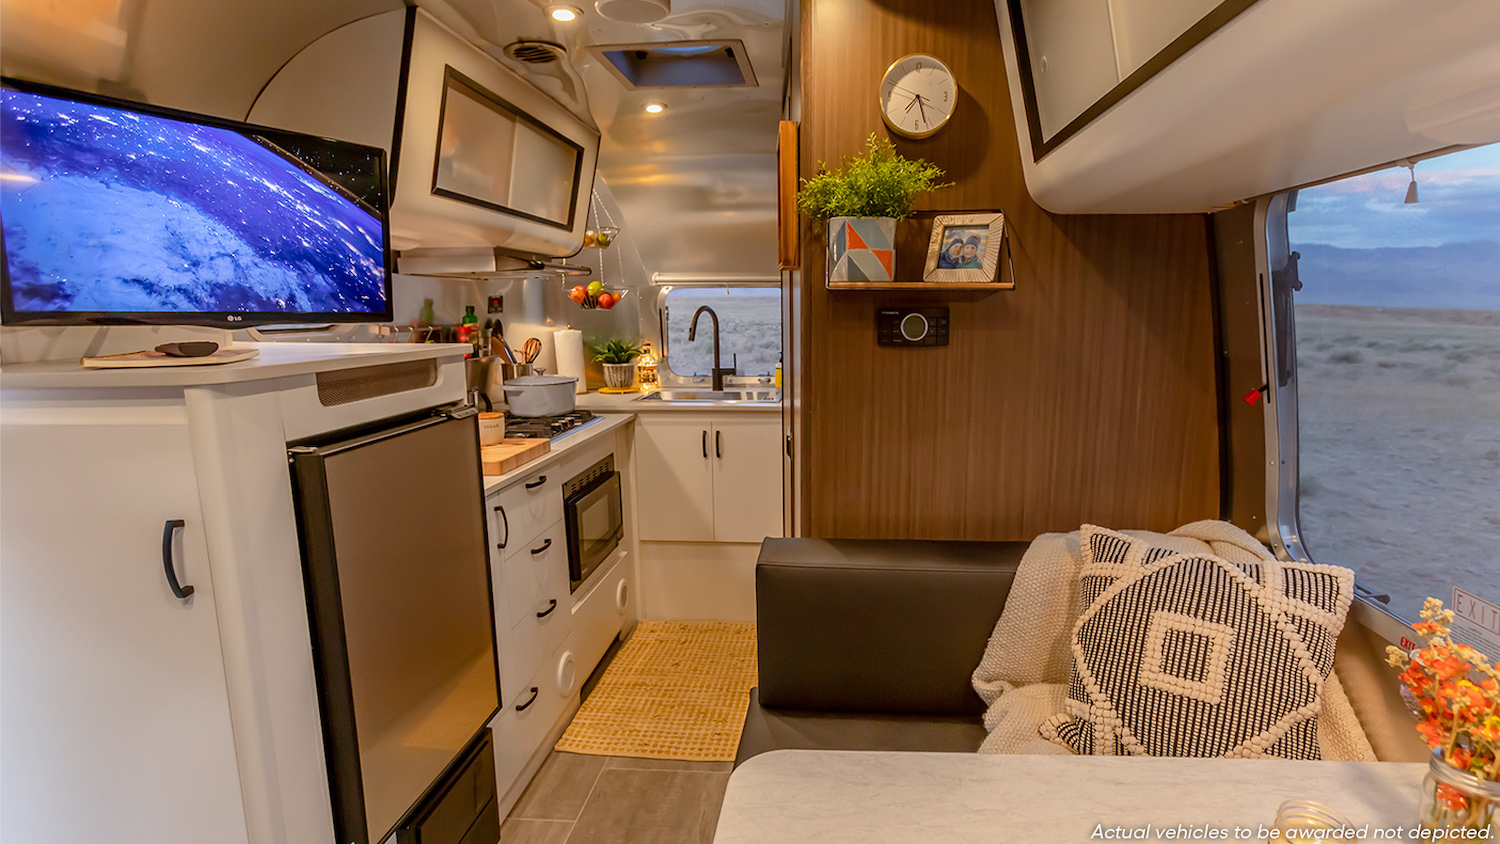 The interior of an Airstream Caravel 20FB travel trailer being given away by Omaze